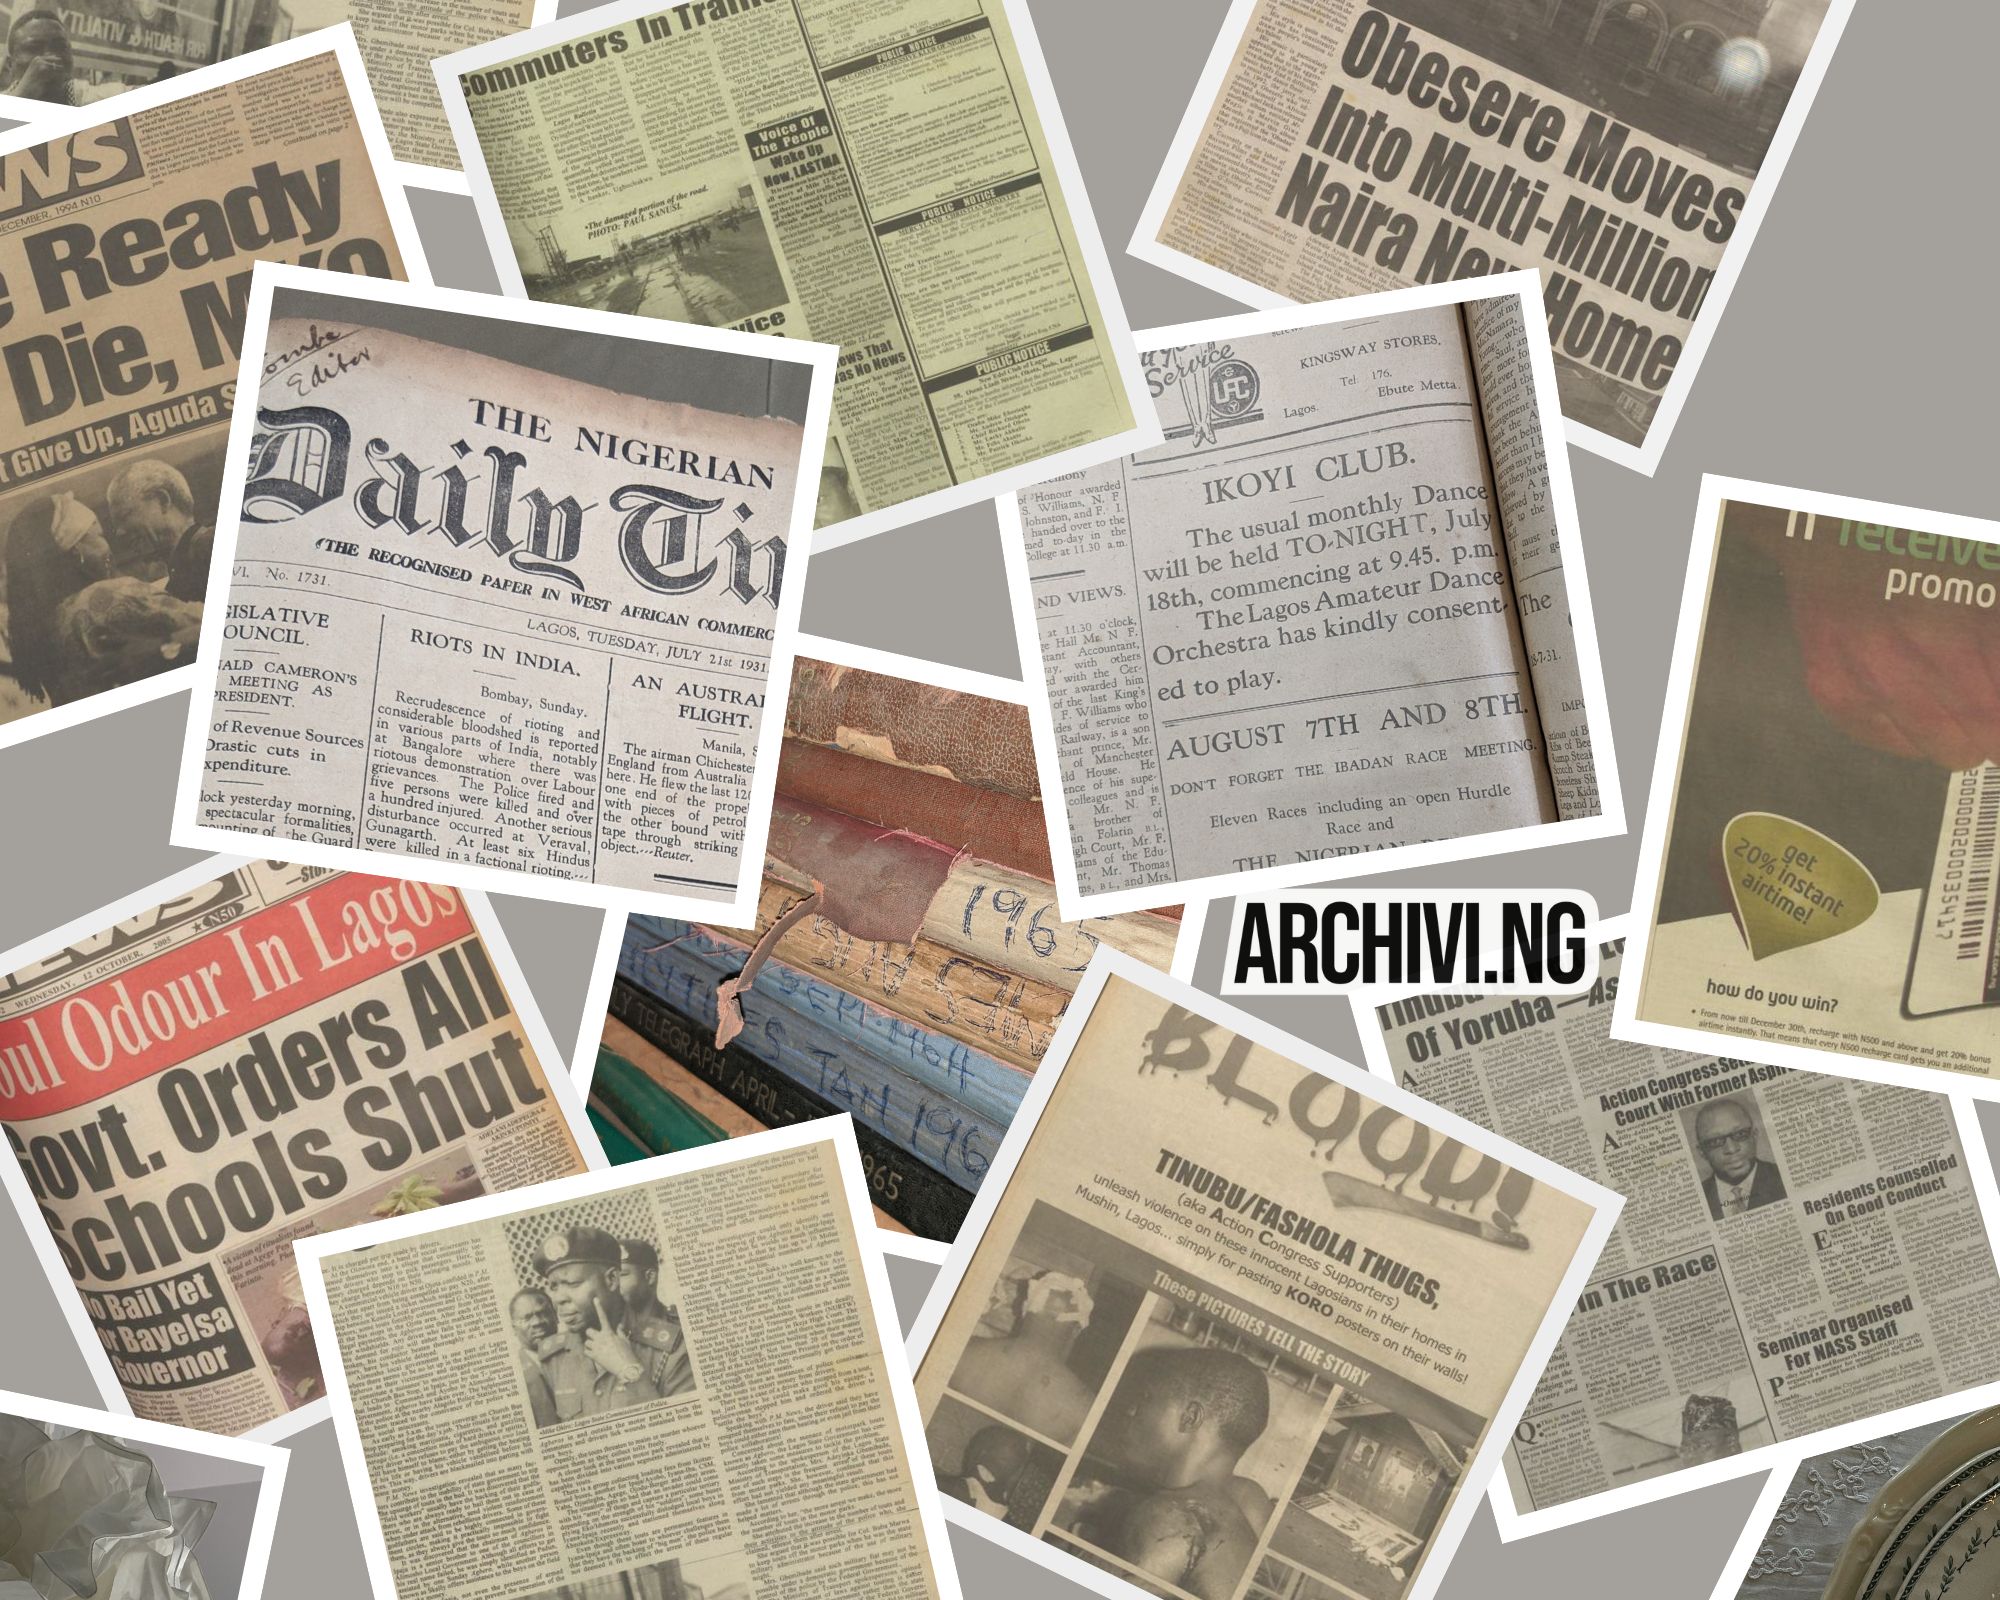 Photos of old newspapers from different libraries in a collage.